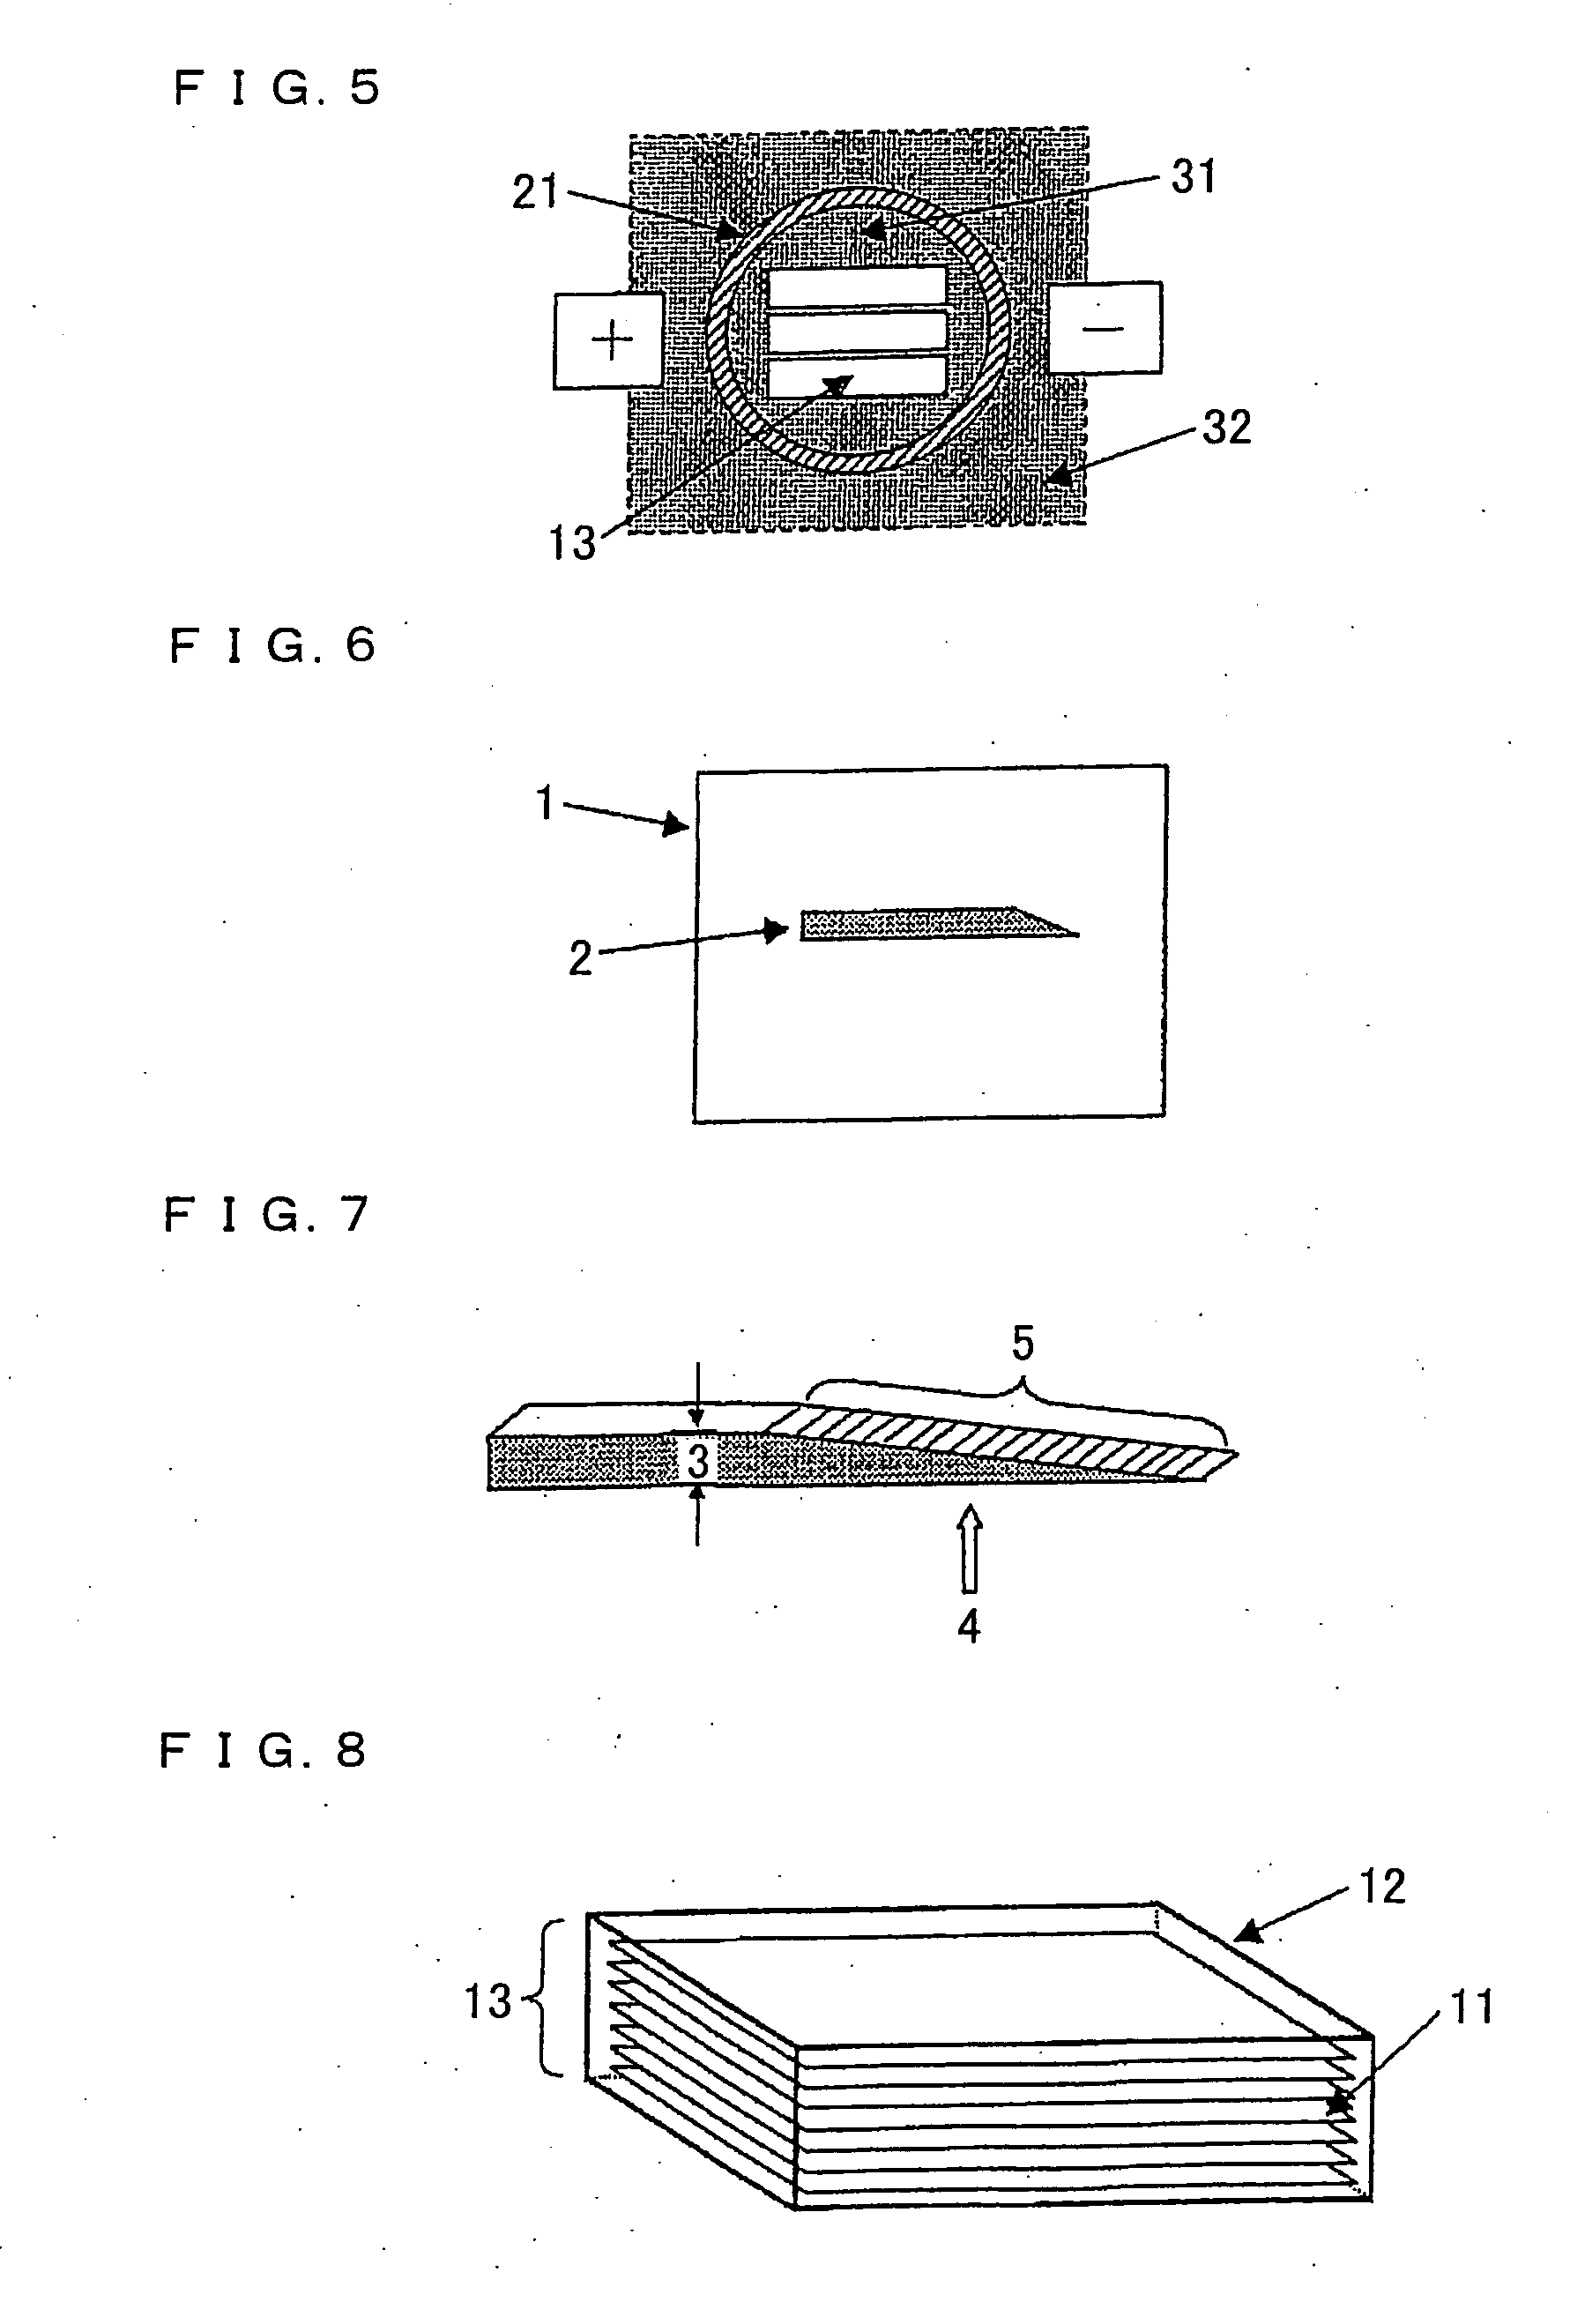 Method for Producing Graphite Film, and Graphite Film Produced By the Method